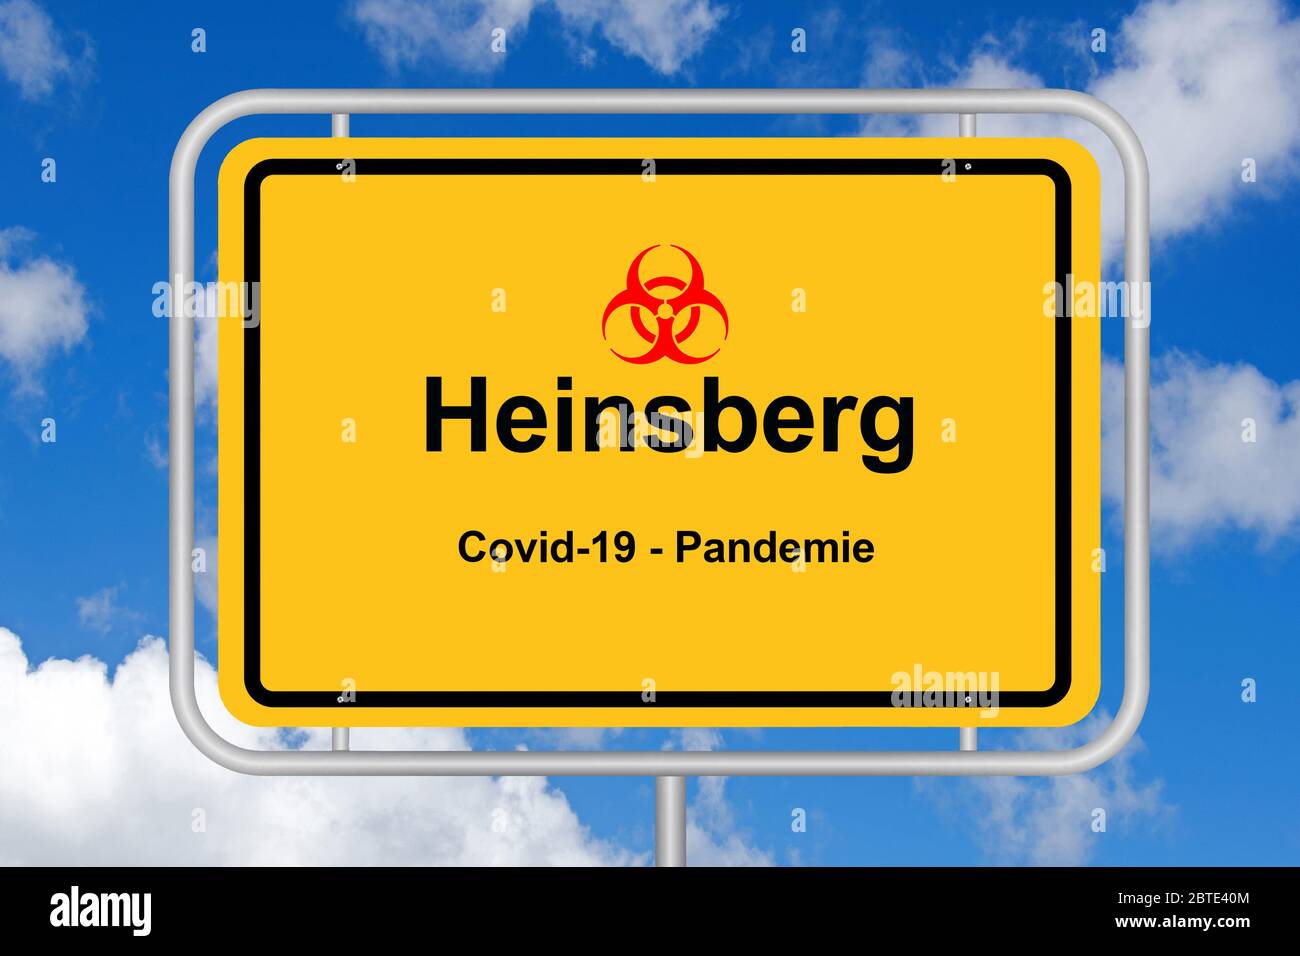 town sign of Heinsberg, COVID19, pandemic, Germany Stock Photo